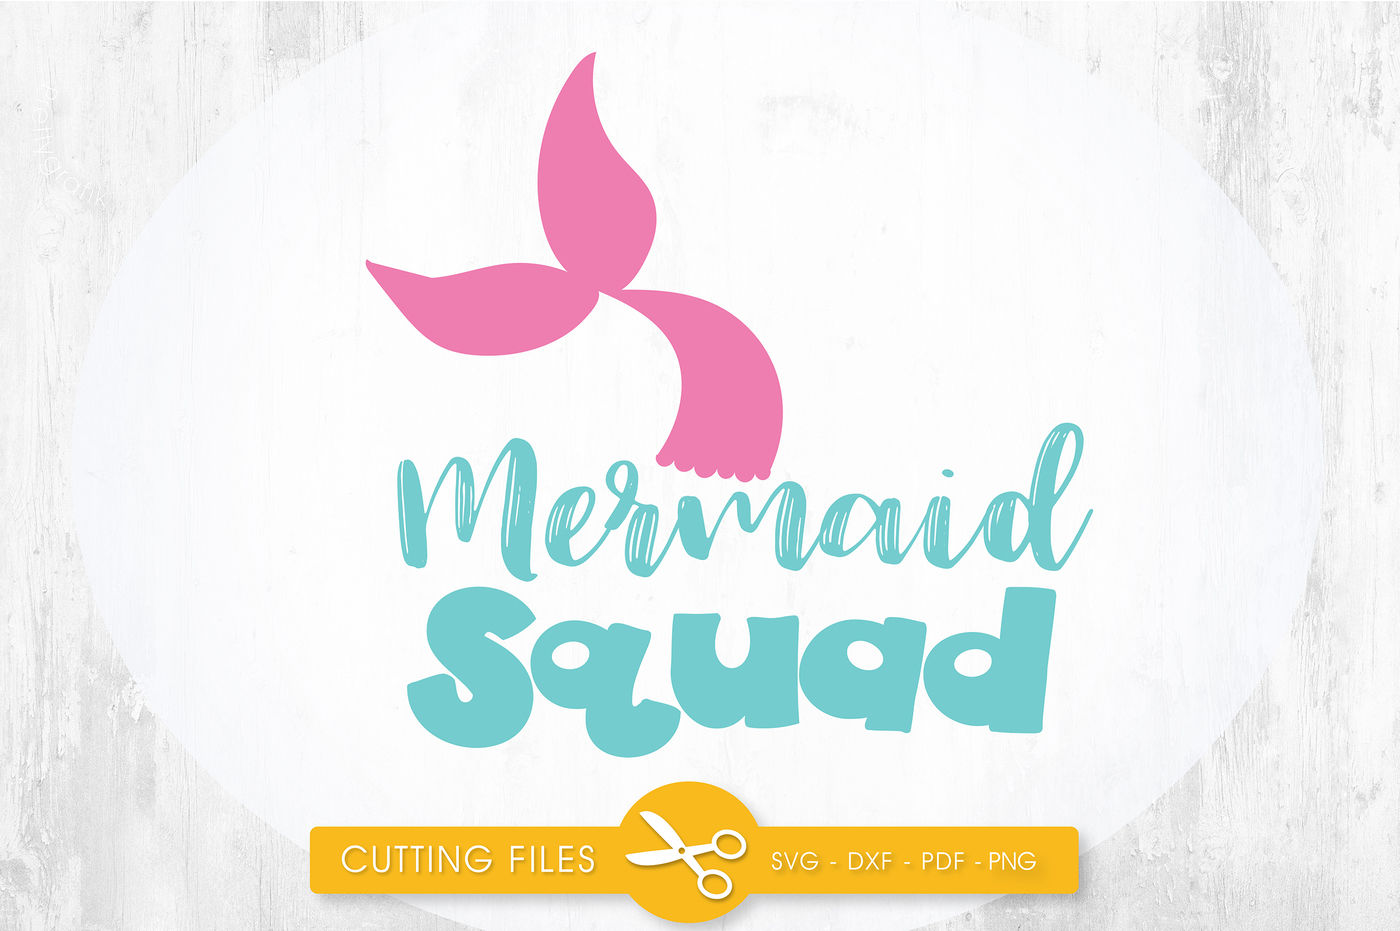 ori 3464963 07cac34e682ec6d41b6b5f44e7dabef2b22848e3 mermaid squad svg png eps dxf cut file